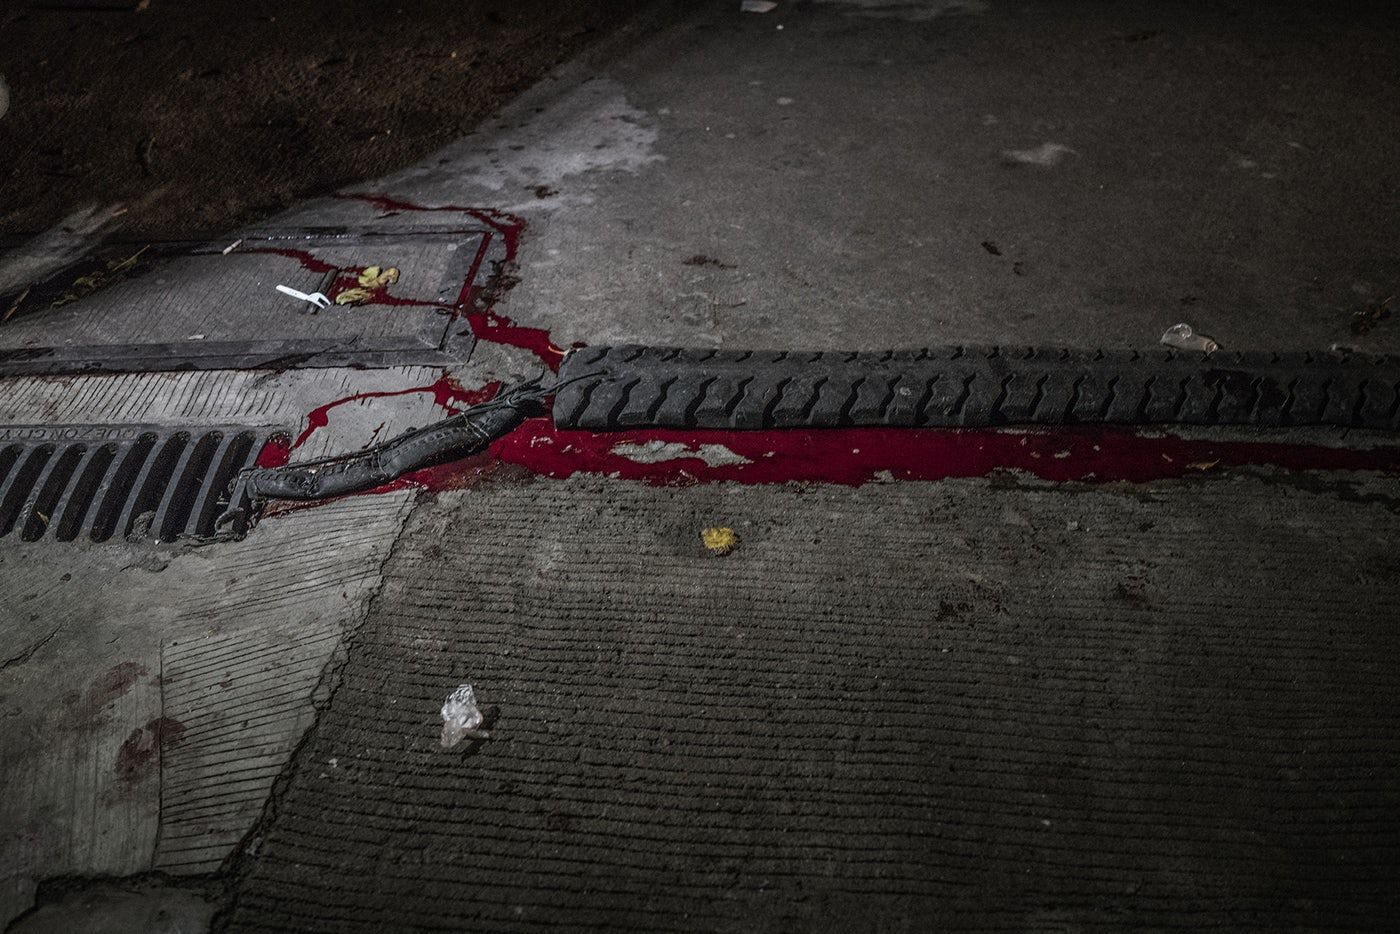 Manuel Borbe’s blood runs into a storm drain after he was killed by unidentified masked men on motorcycles in the Holy Spirit district of Quezon City. According to his sister, Vivian, Borbe dealt drugs, but not by choice; he was forced into the drug trade to support his addiction to methampetamines, known locally as shabu. Image by James Whitlow Delano. Philippines, 2017.